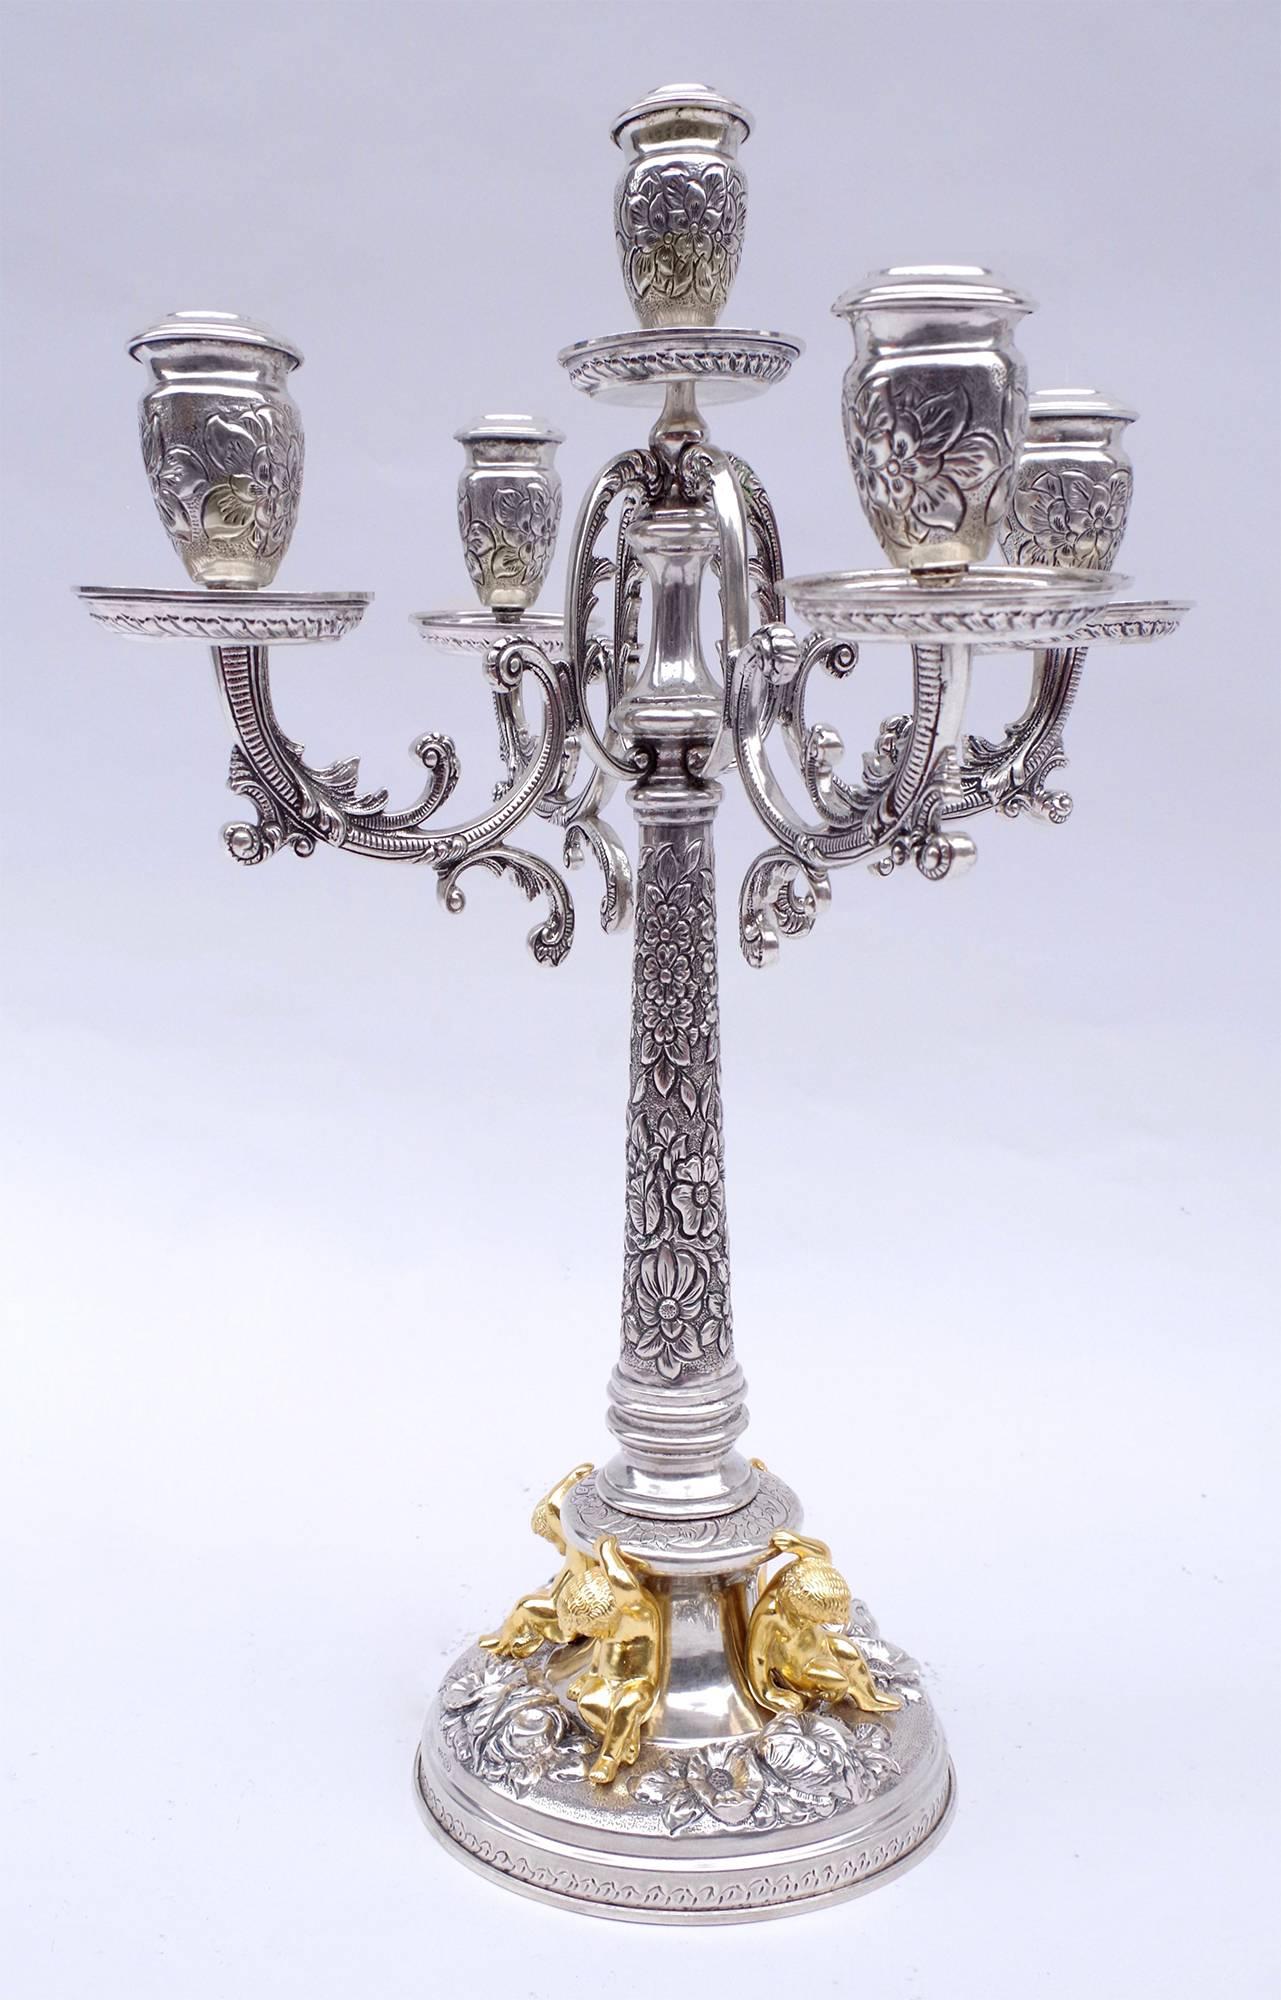 Pair of candelabra with four arms and five fires in the Louis XIV style in solid silver chiseled with interlaces patterns.

Arms are adorned with stylized vegetals and four gilt putti decorate the round base of each candelabrum.

Spanish work